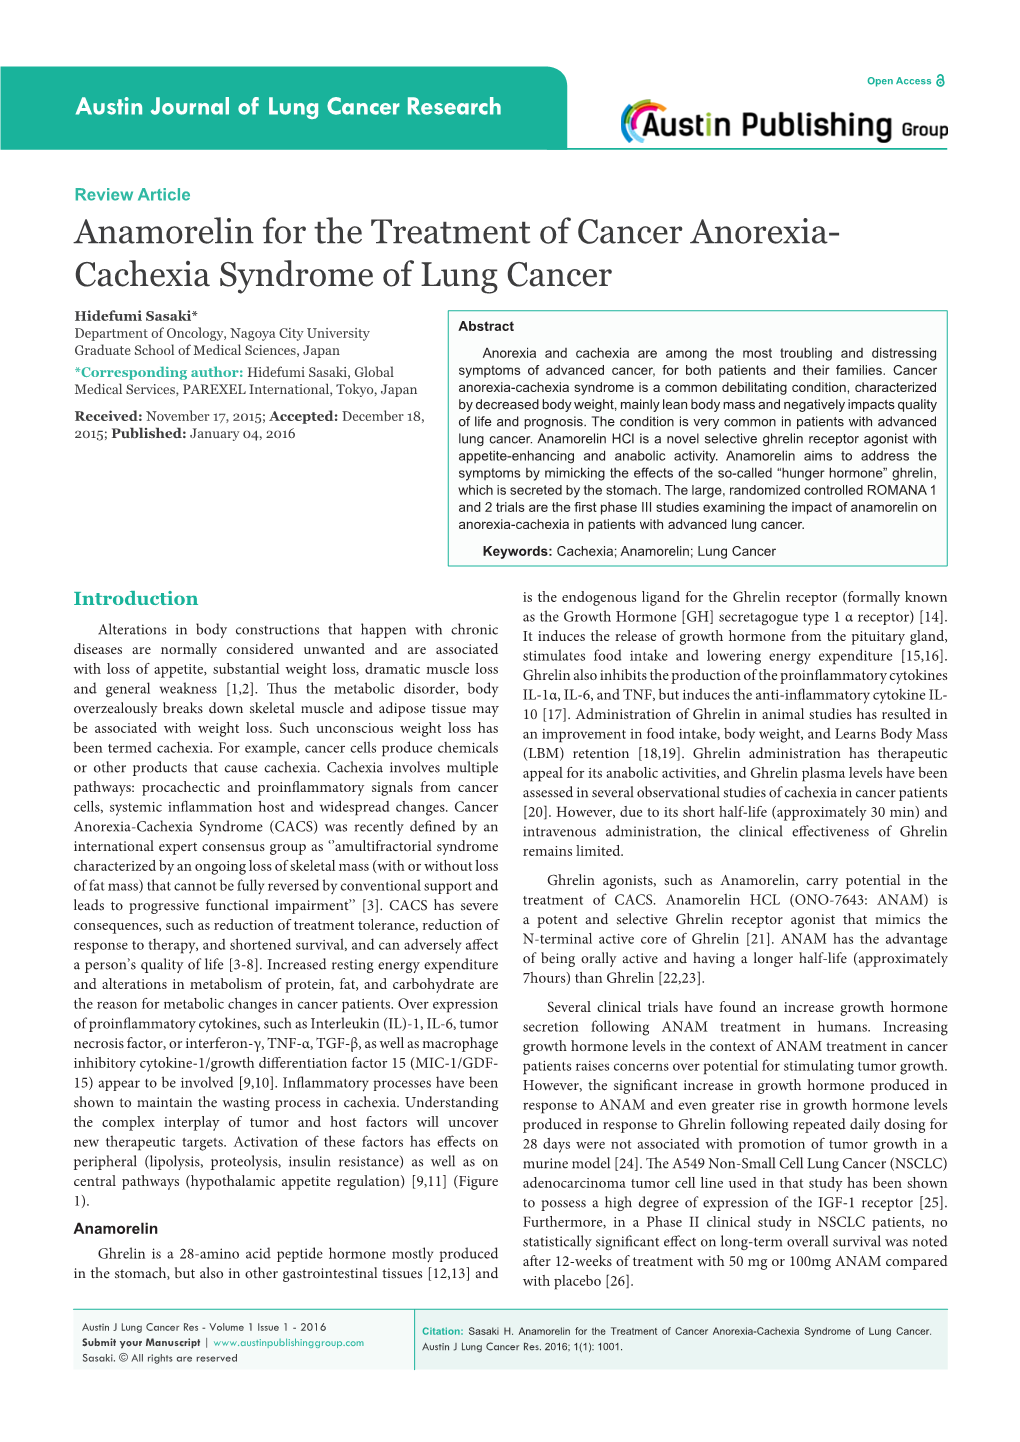 Anamorelin for the Treatment of Cancer Anorexia-Cachexia Syndrome of Lung Cancer